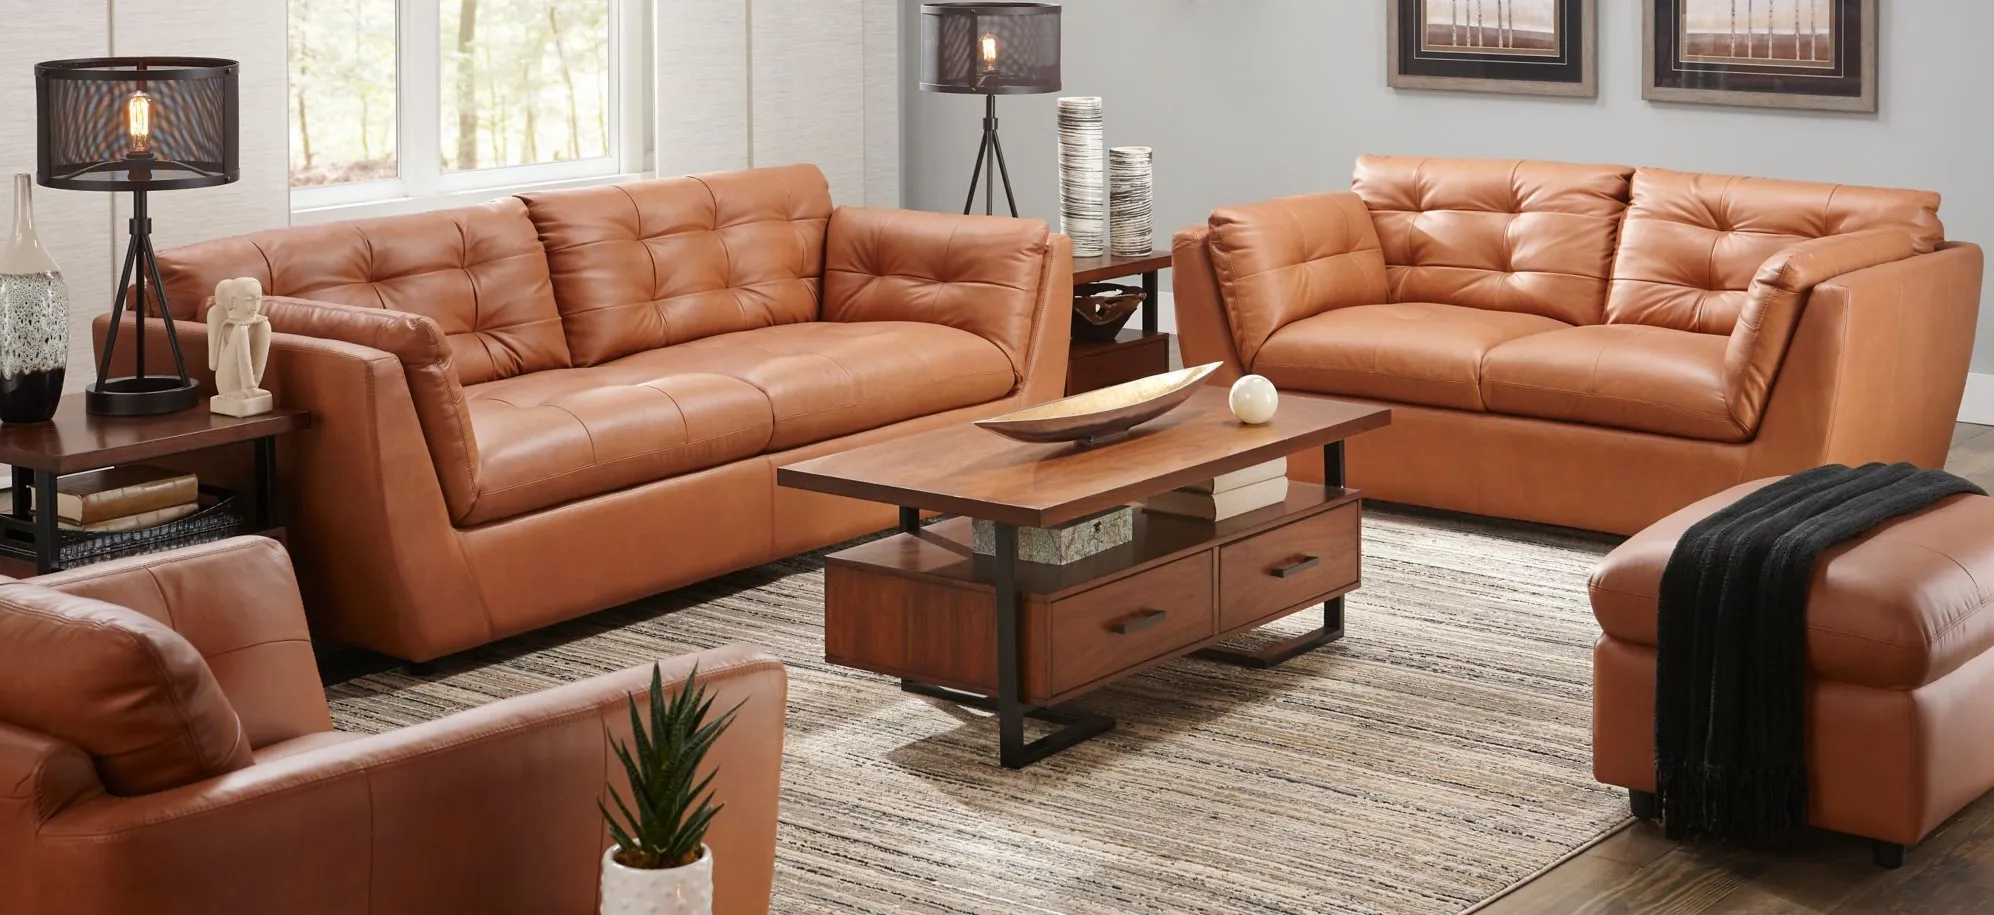 Damar 2-pc. Leather Sofa and Loveseat Set in Brown by Chateau D'Ax